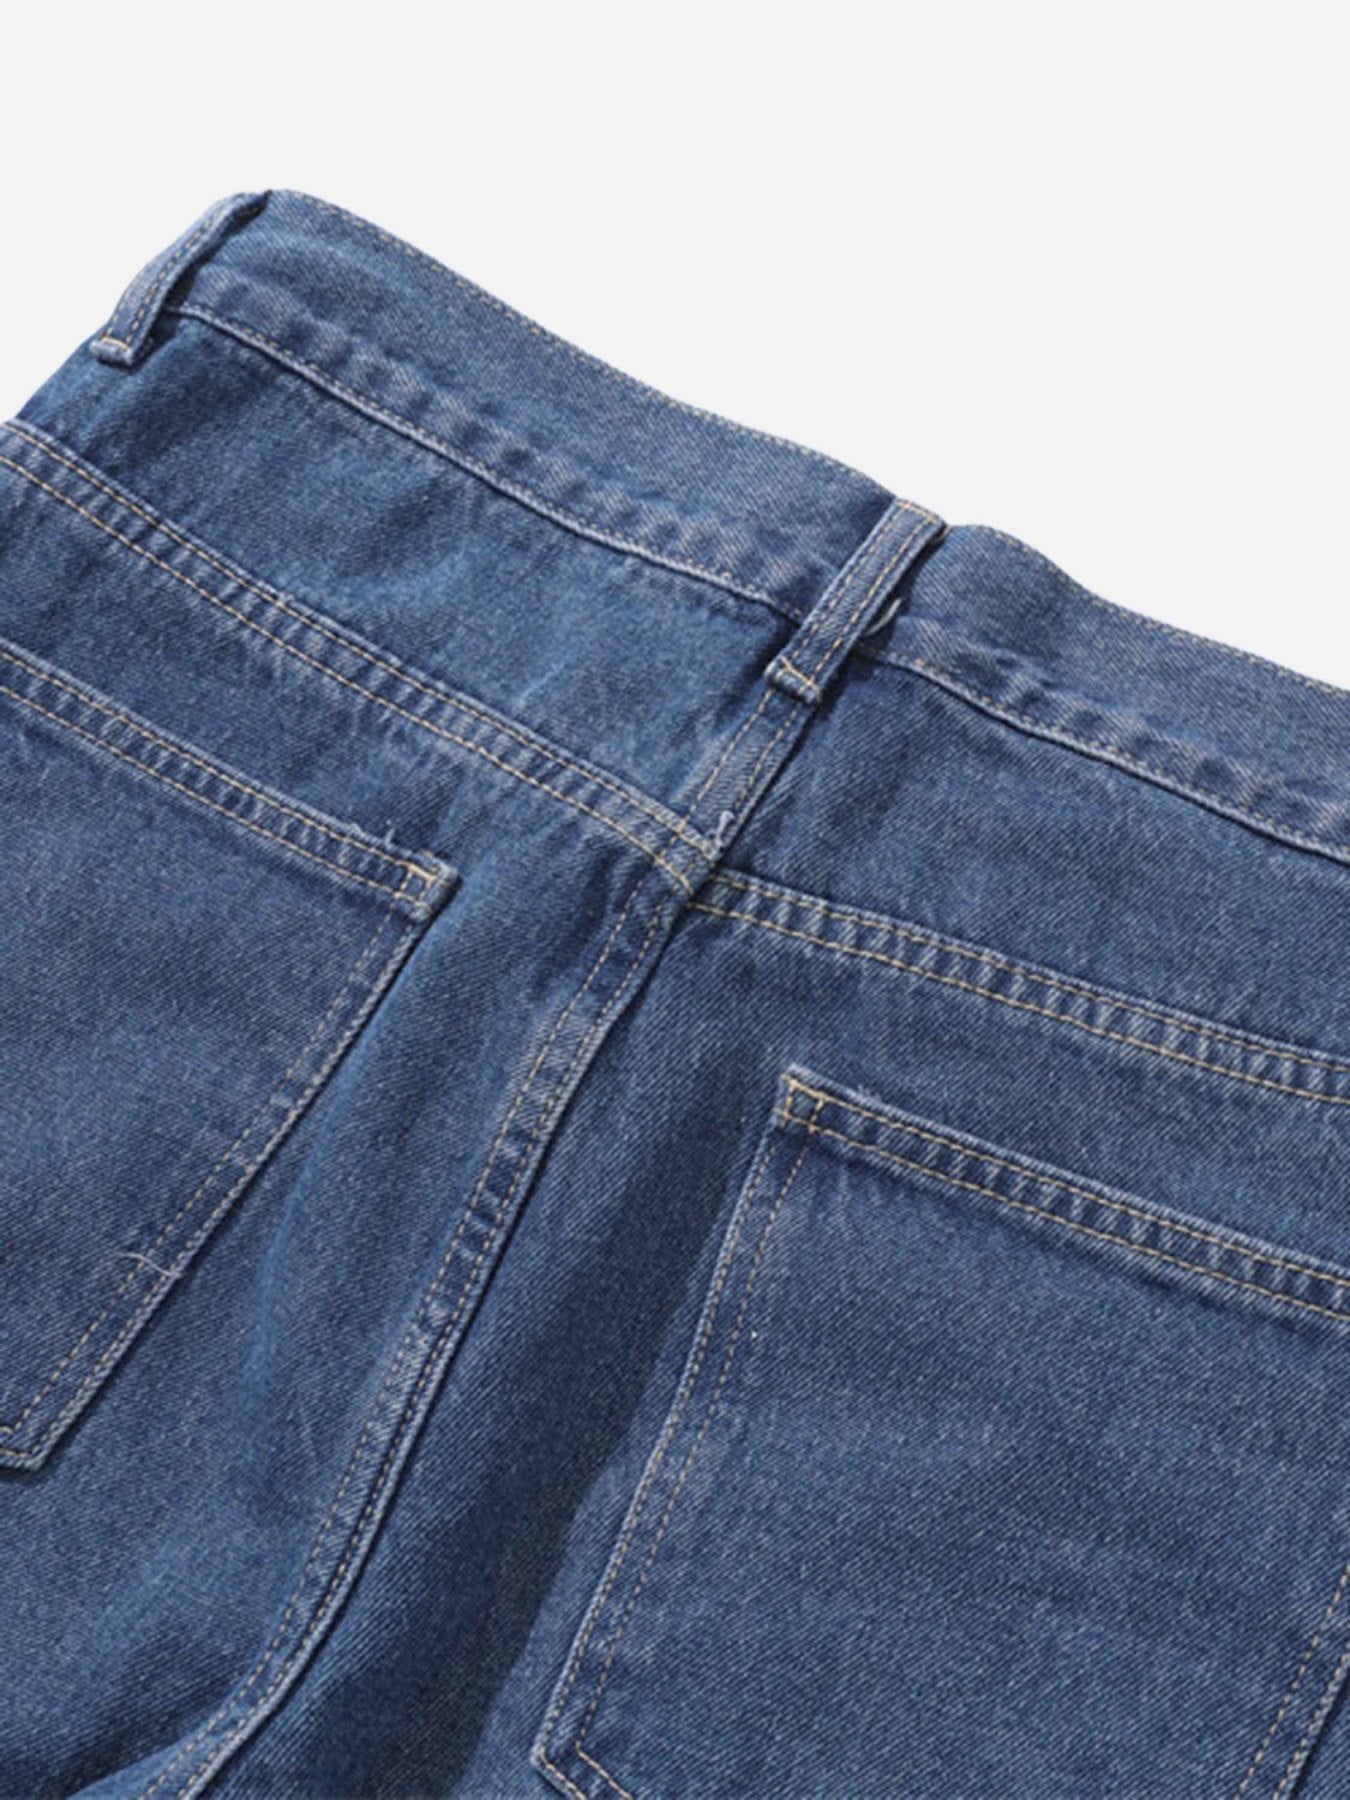 The Supermade Heavy-duty Ripped Denim Pants